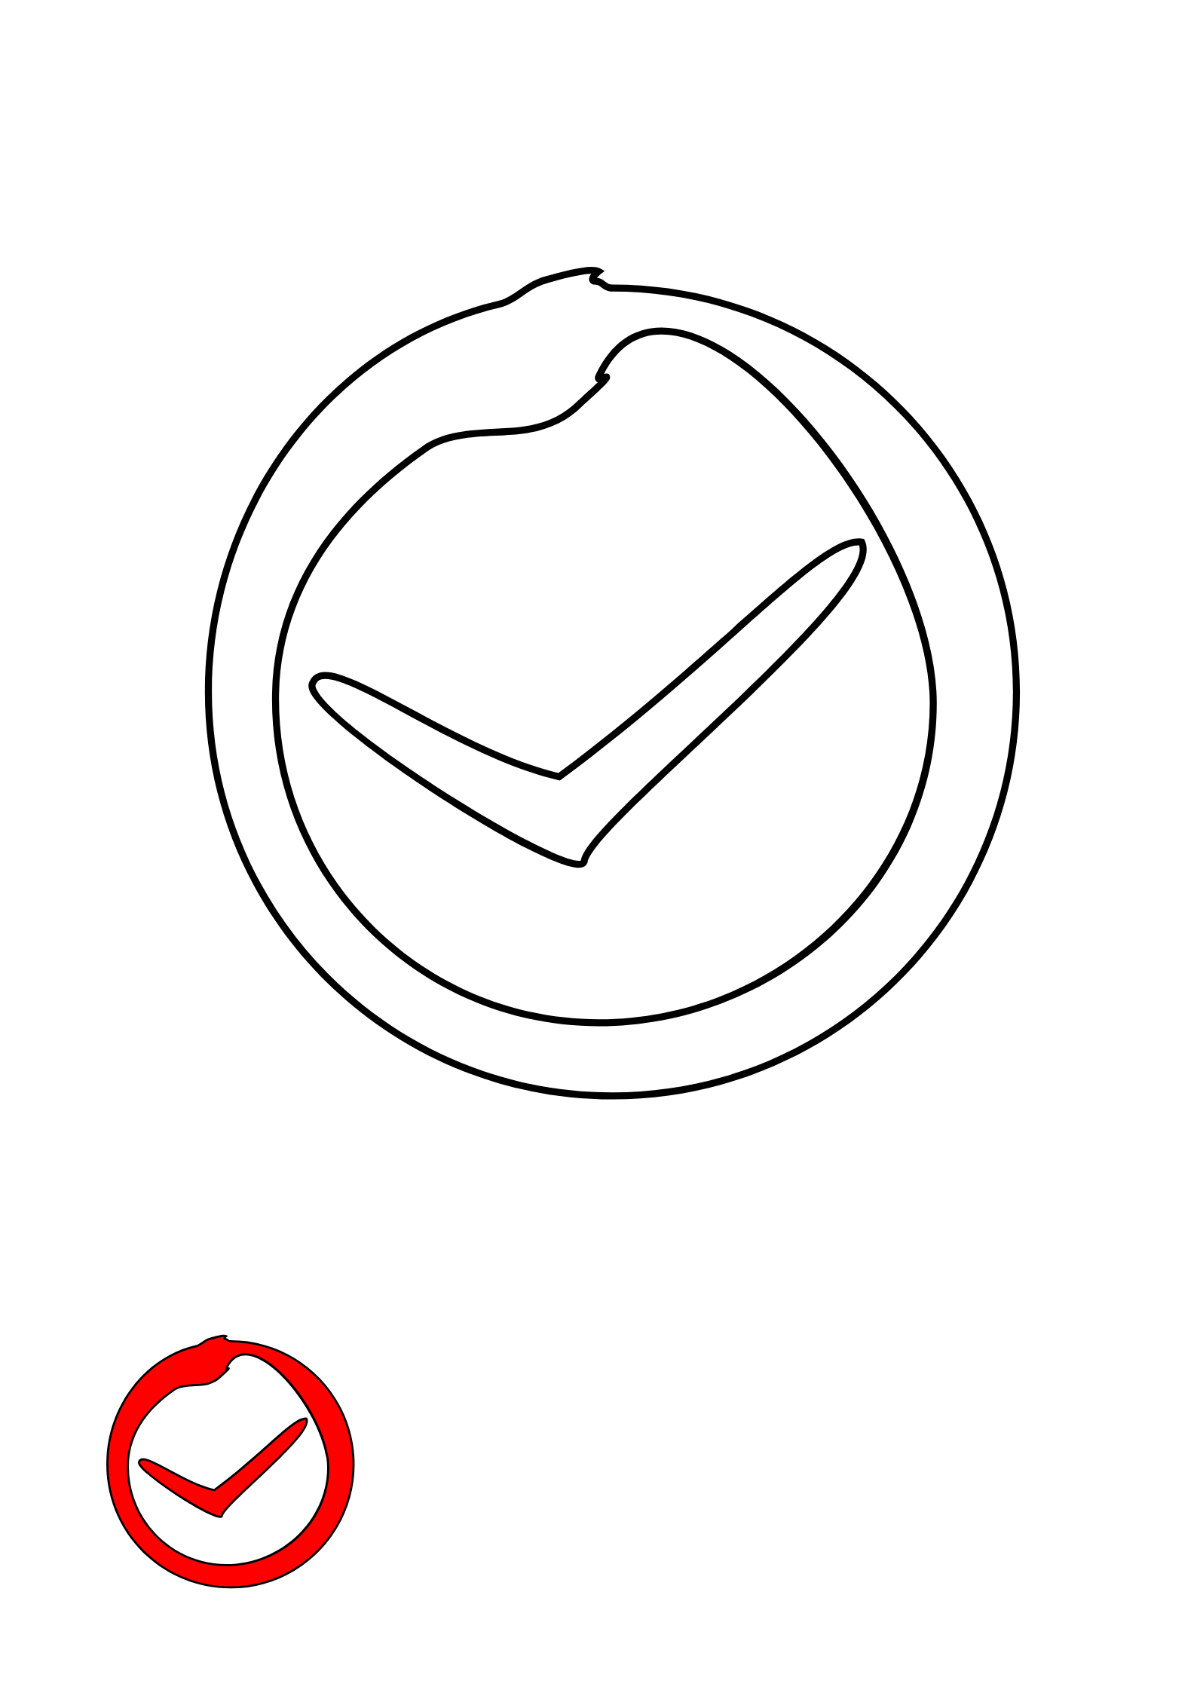 Free Check Mark Doodle coloring page Template